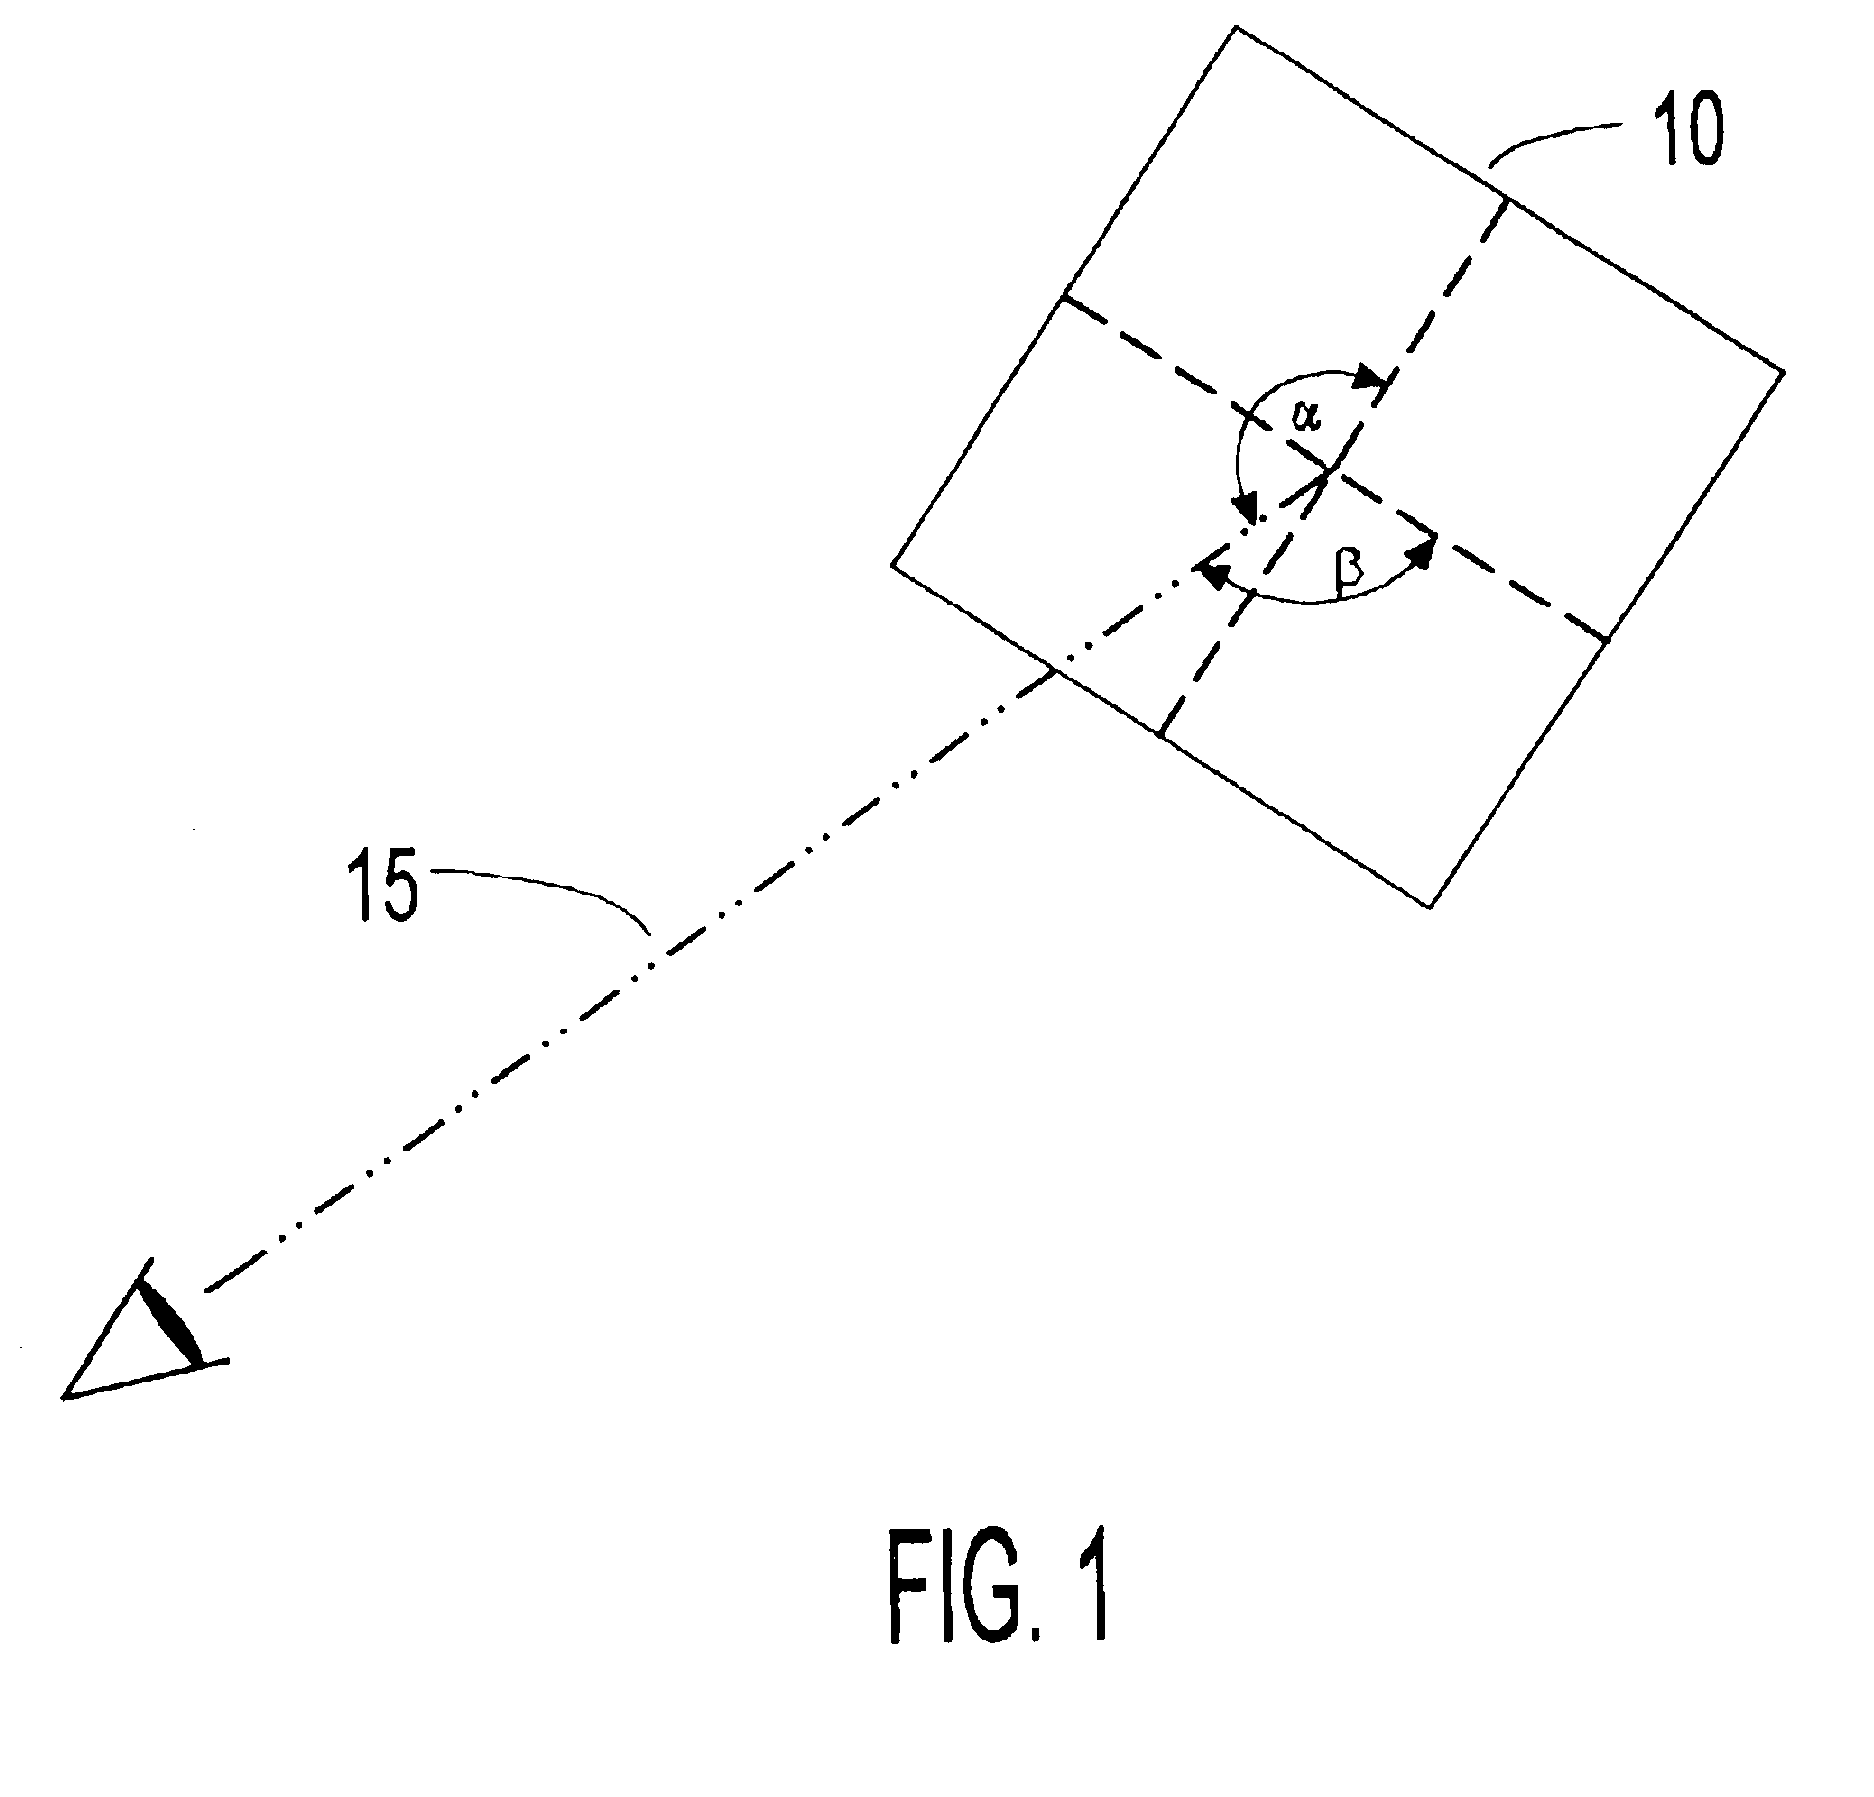 Head-mounted virtual display apparatus with a near-eye light deflecting element in the peripheral field of view